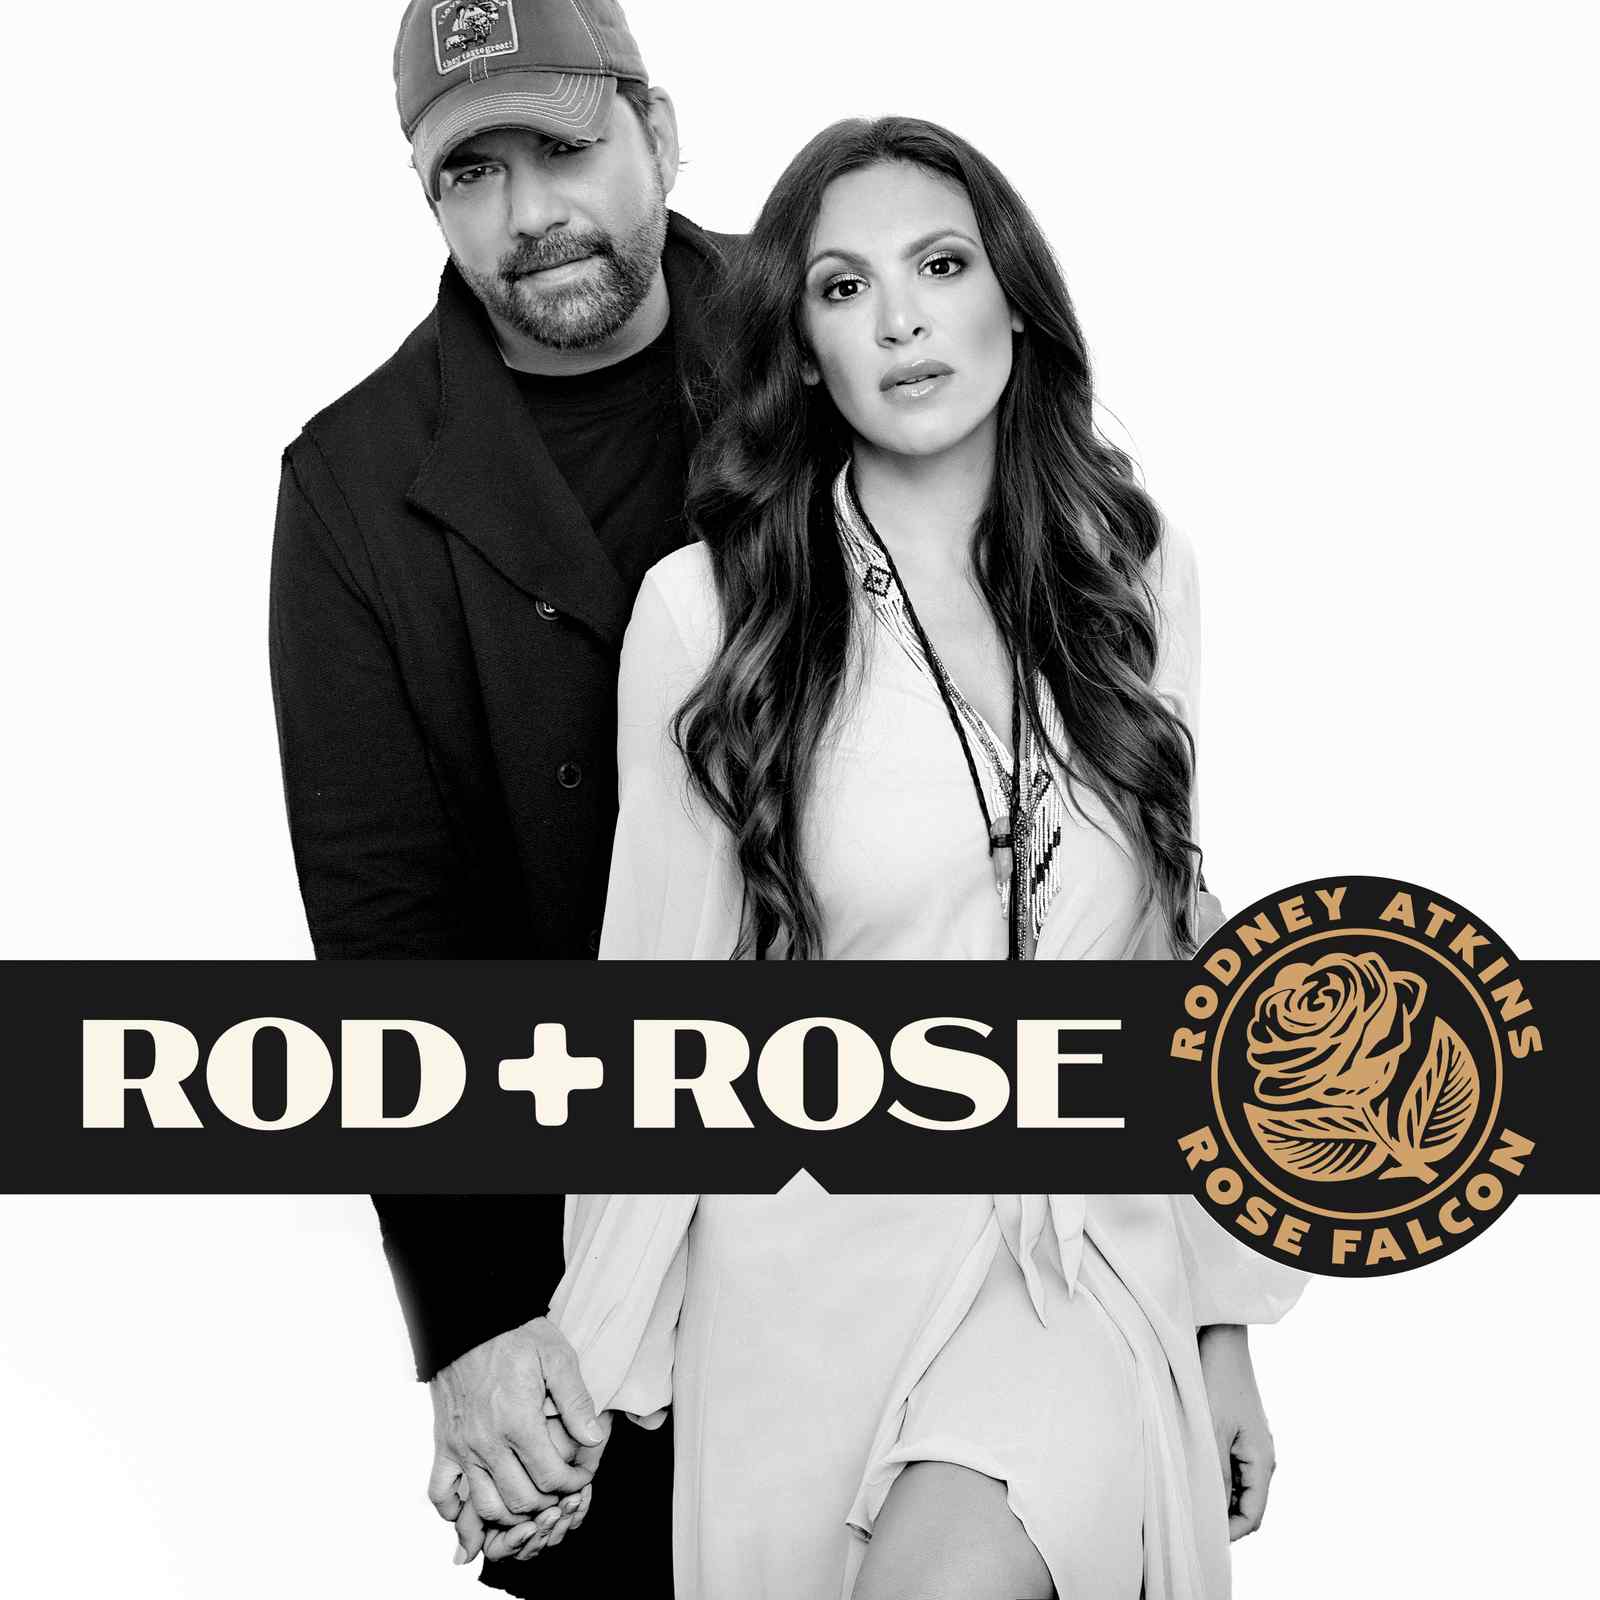 Rod + Rose EP by Rod + Rose